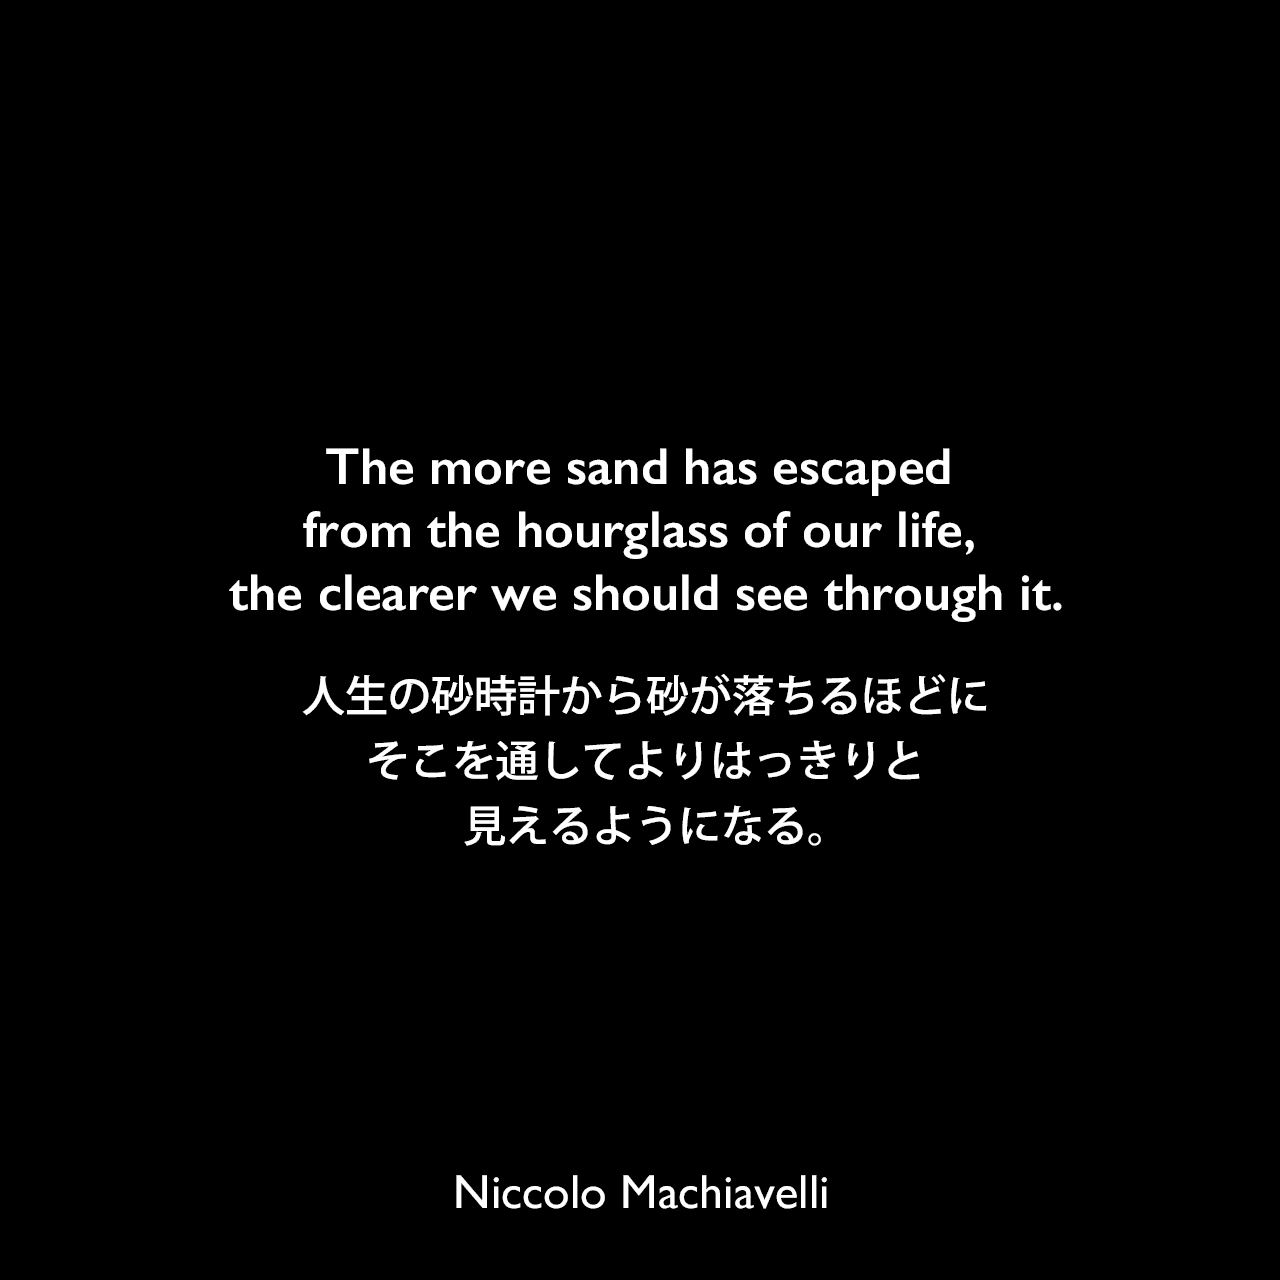 The more sand has escaped from the hourglass of our life, the clearer we should see through it.人生の砂時計から砂が落ちるほどに、そこを通してよりはっきりと見えるようになる。Niccolo Machiavelli